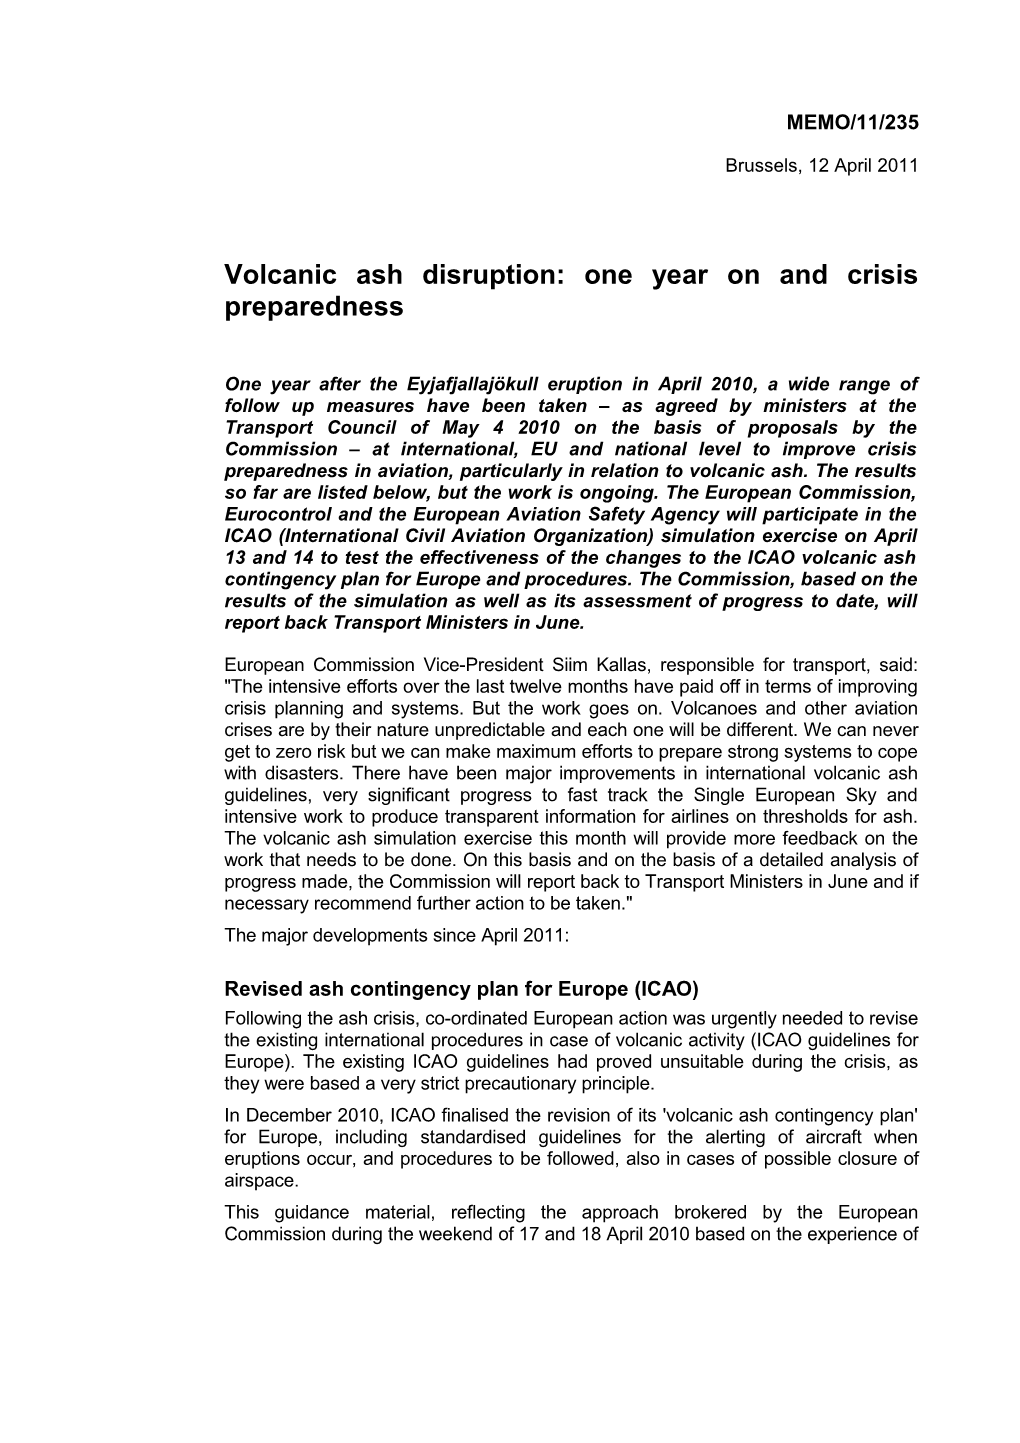 Volcanic Ash Disruption: One Year on and Crisis Preparedness